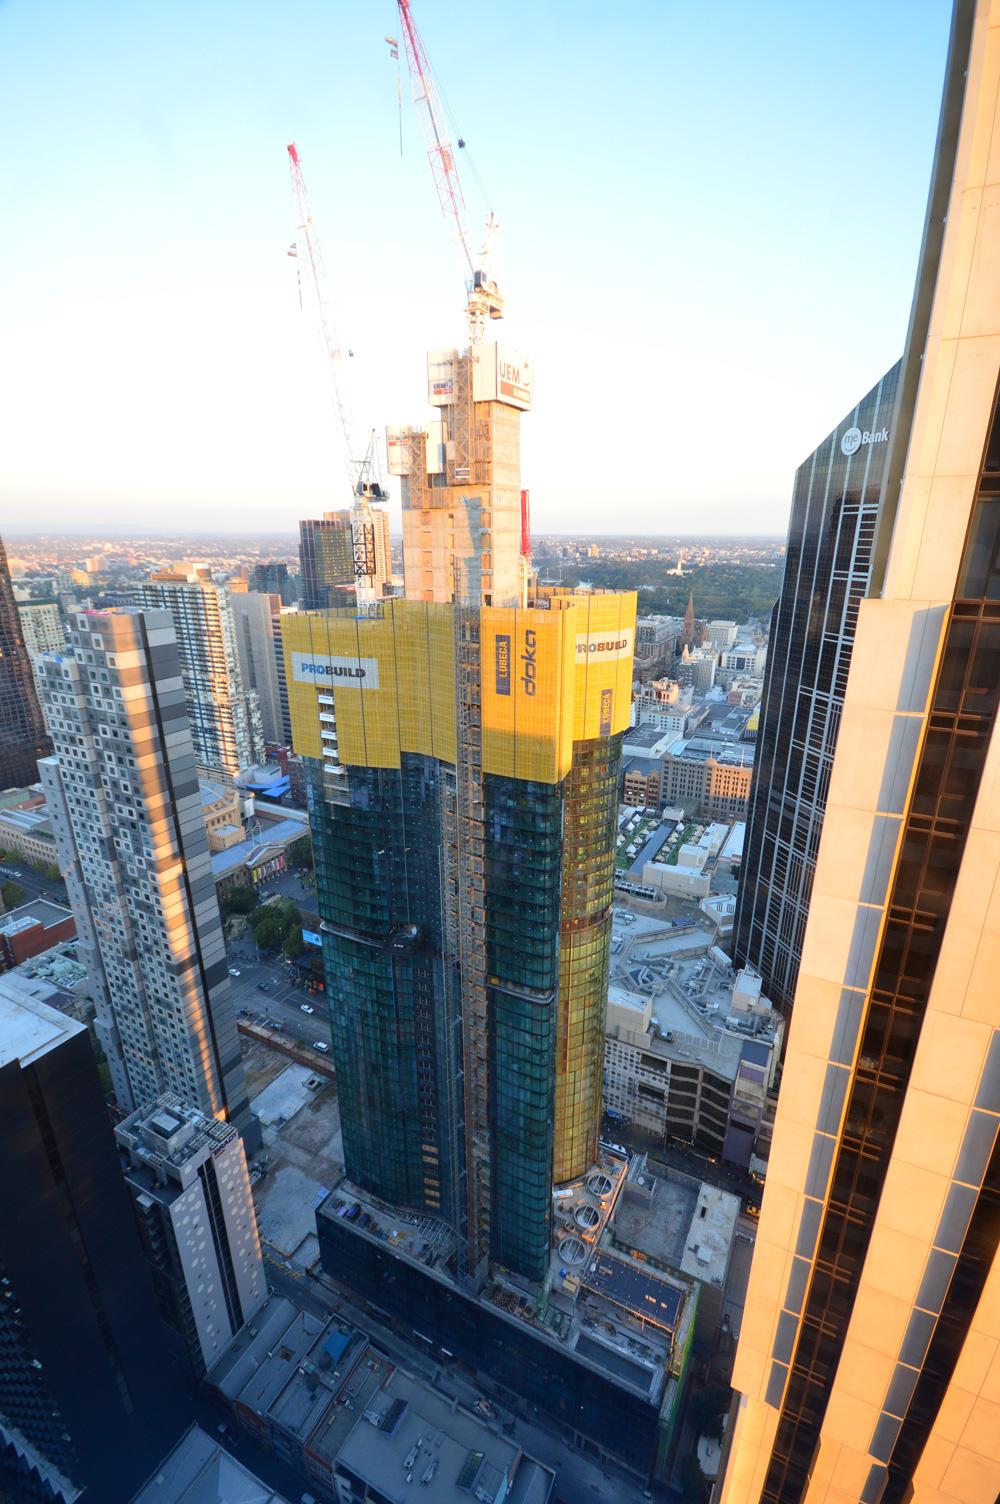 Highrise construction takes on new dimensions with Doka Formwork